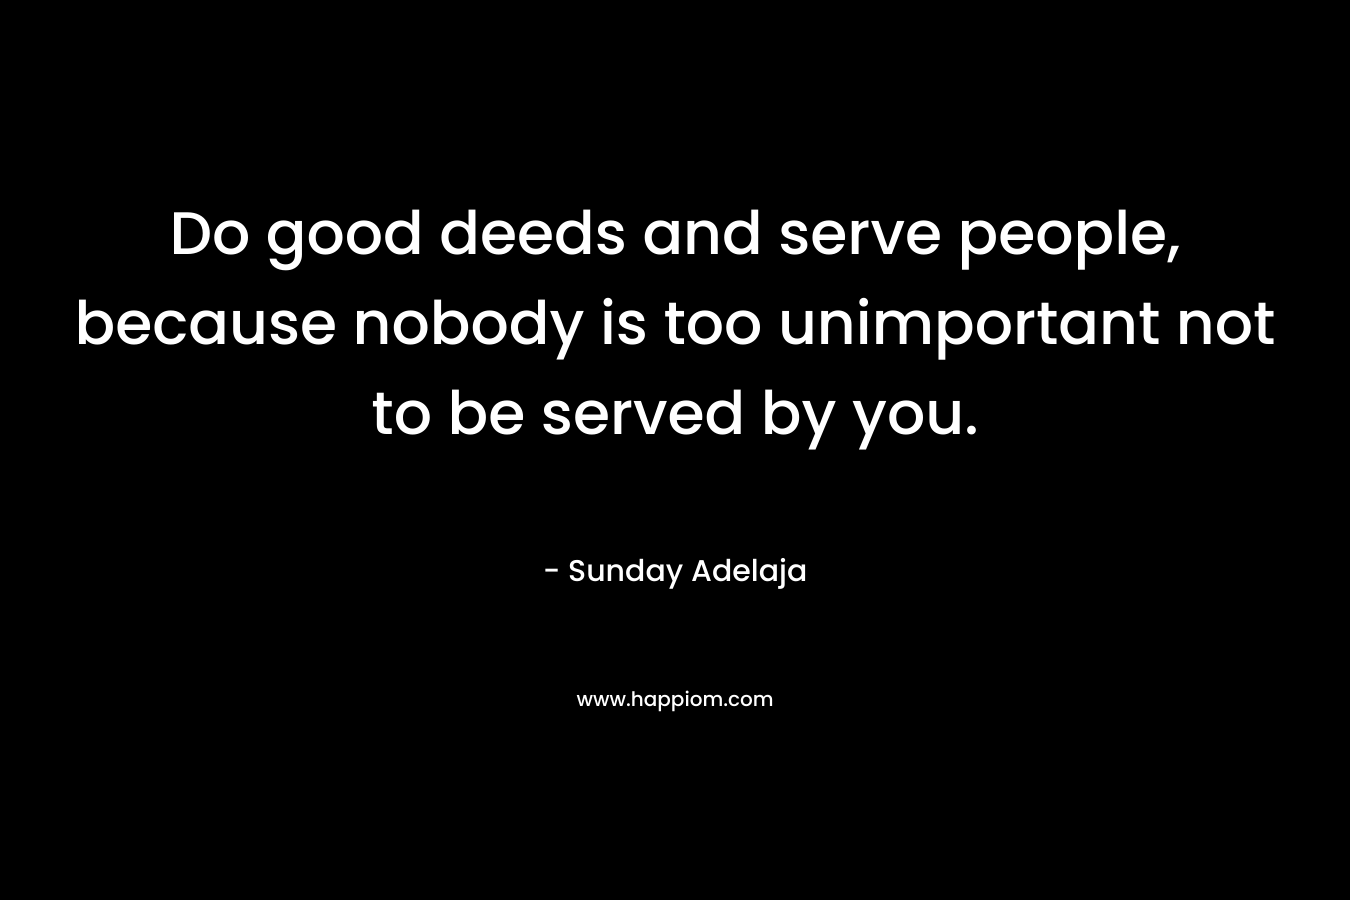 Do good deeds and serve people, because nobody is too unimportant not to be served by you.